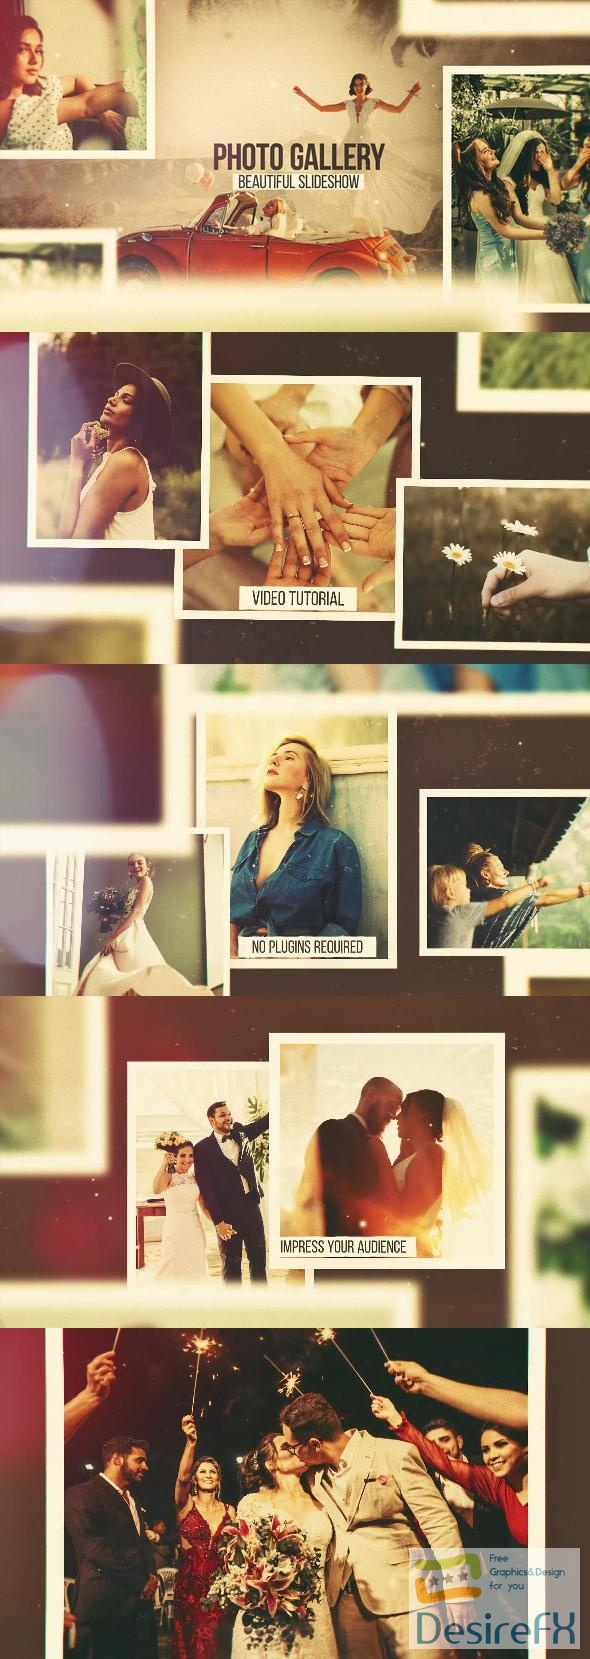 VideoHive Photo Gallery 46761600